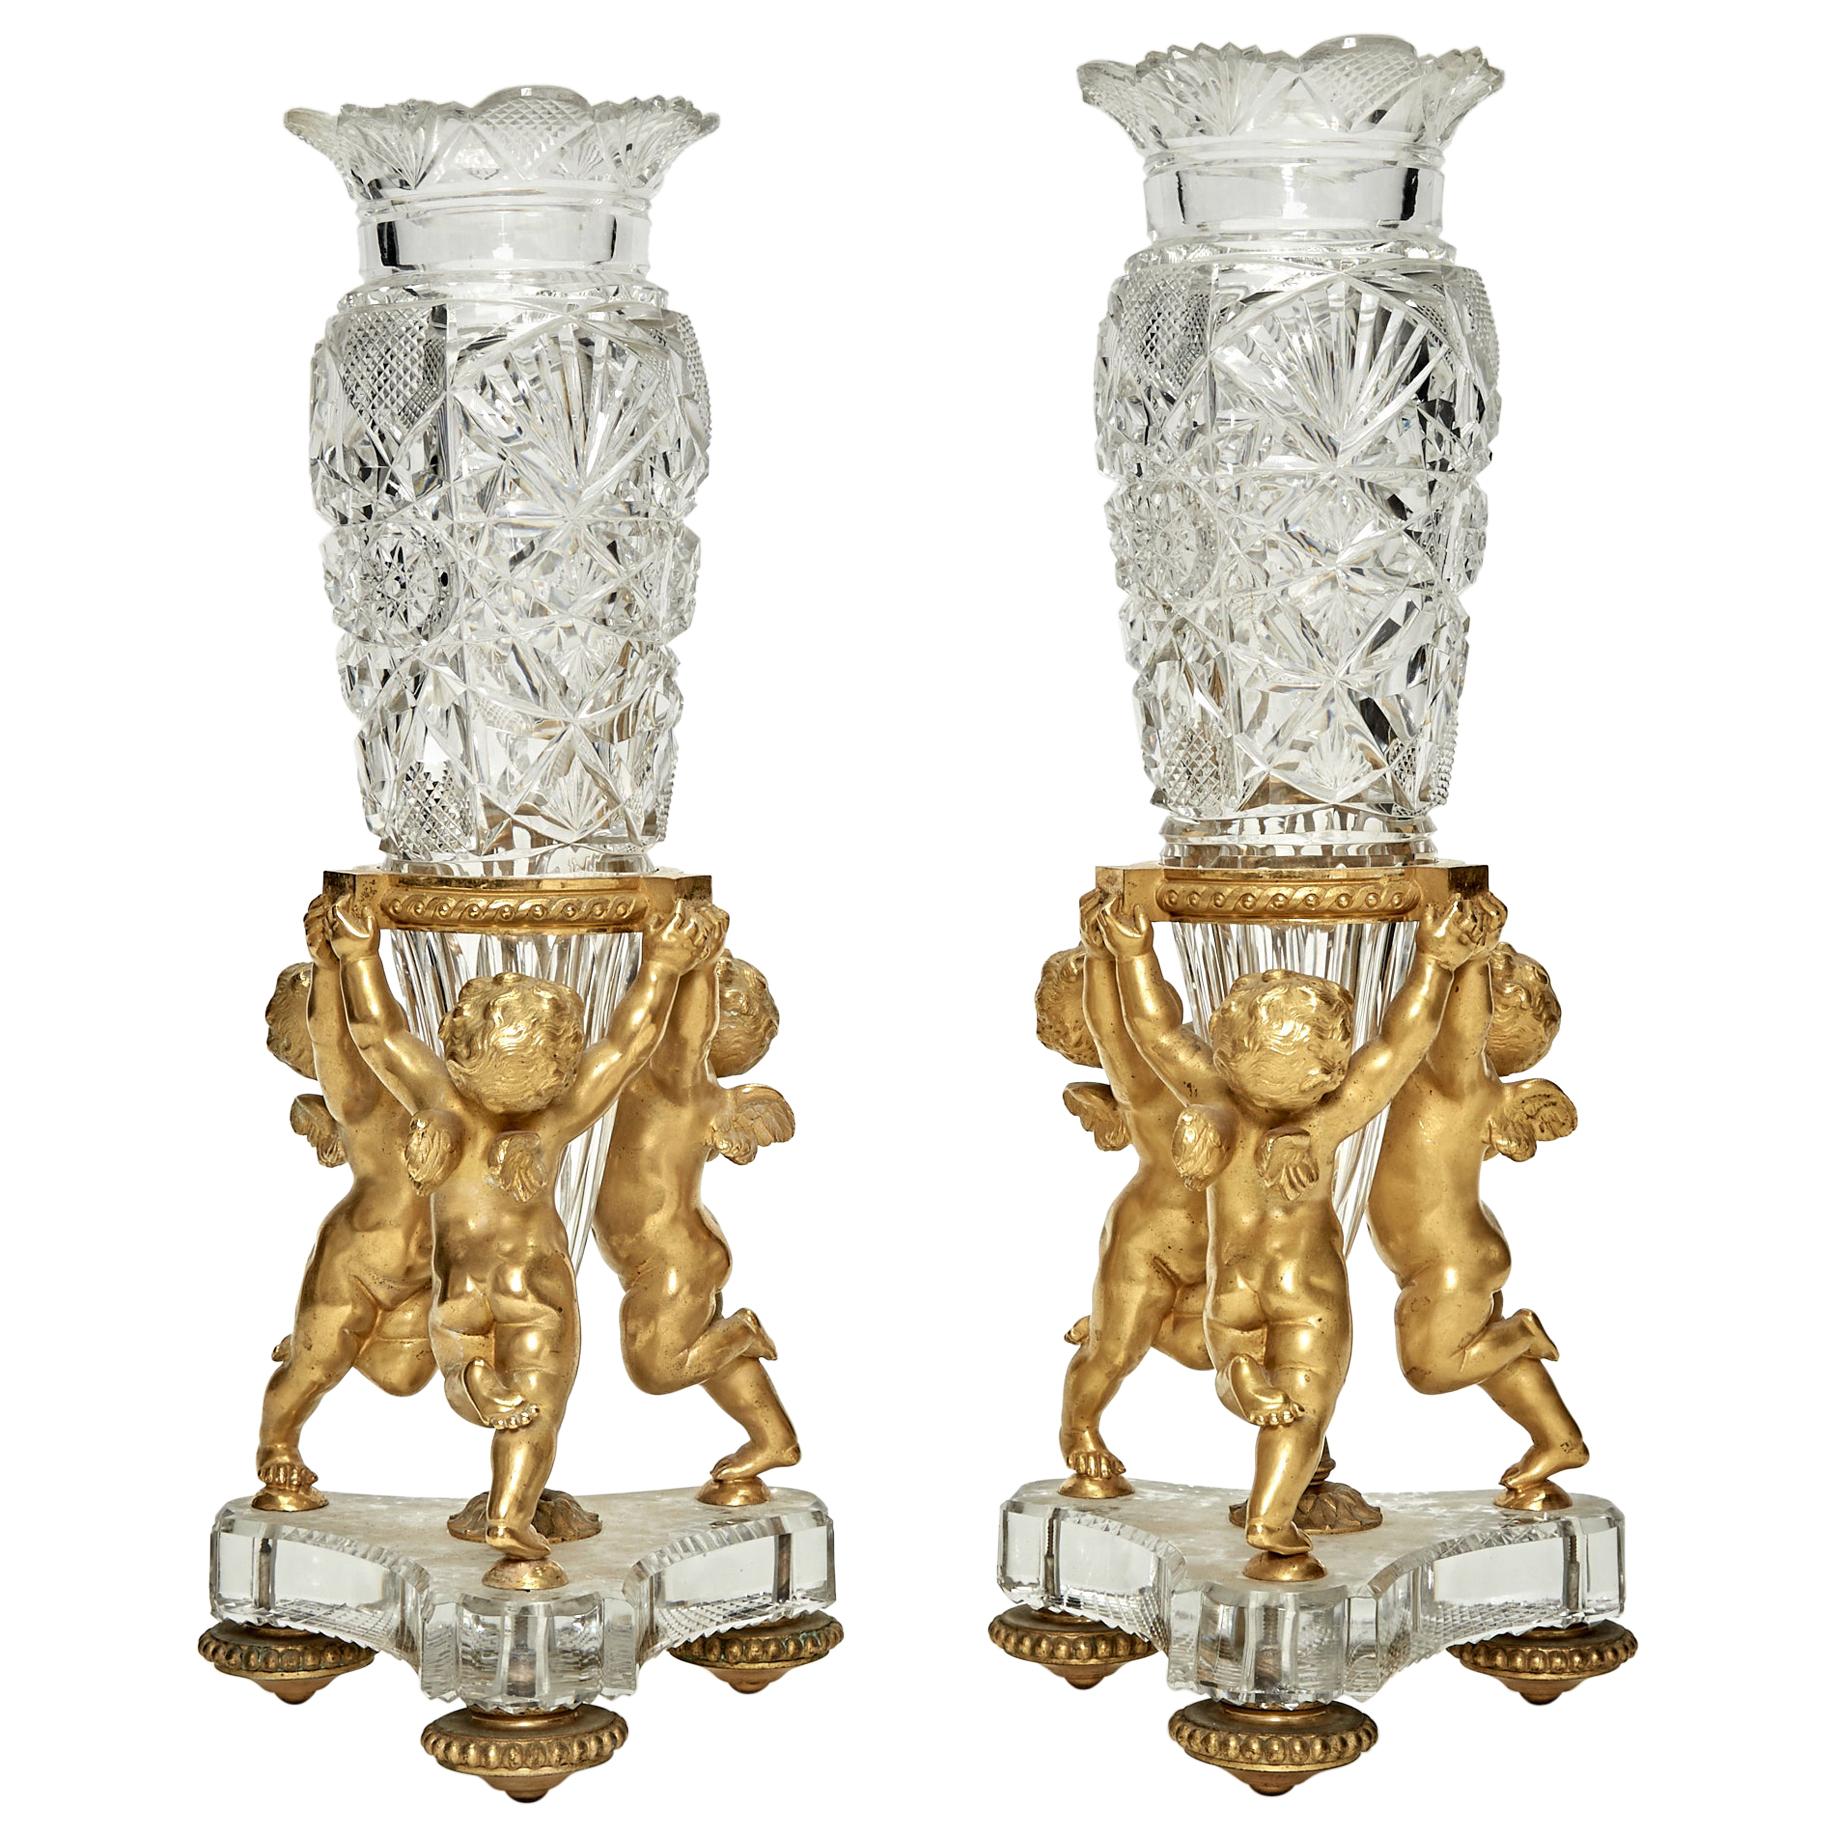 Pair of Baccarat Gilt-Bronze Mounted Cut Glass Figural Vases